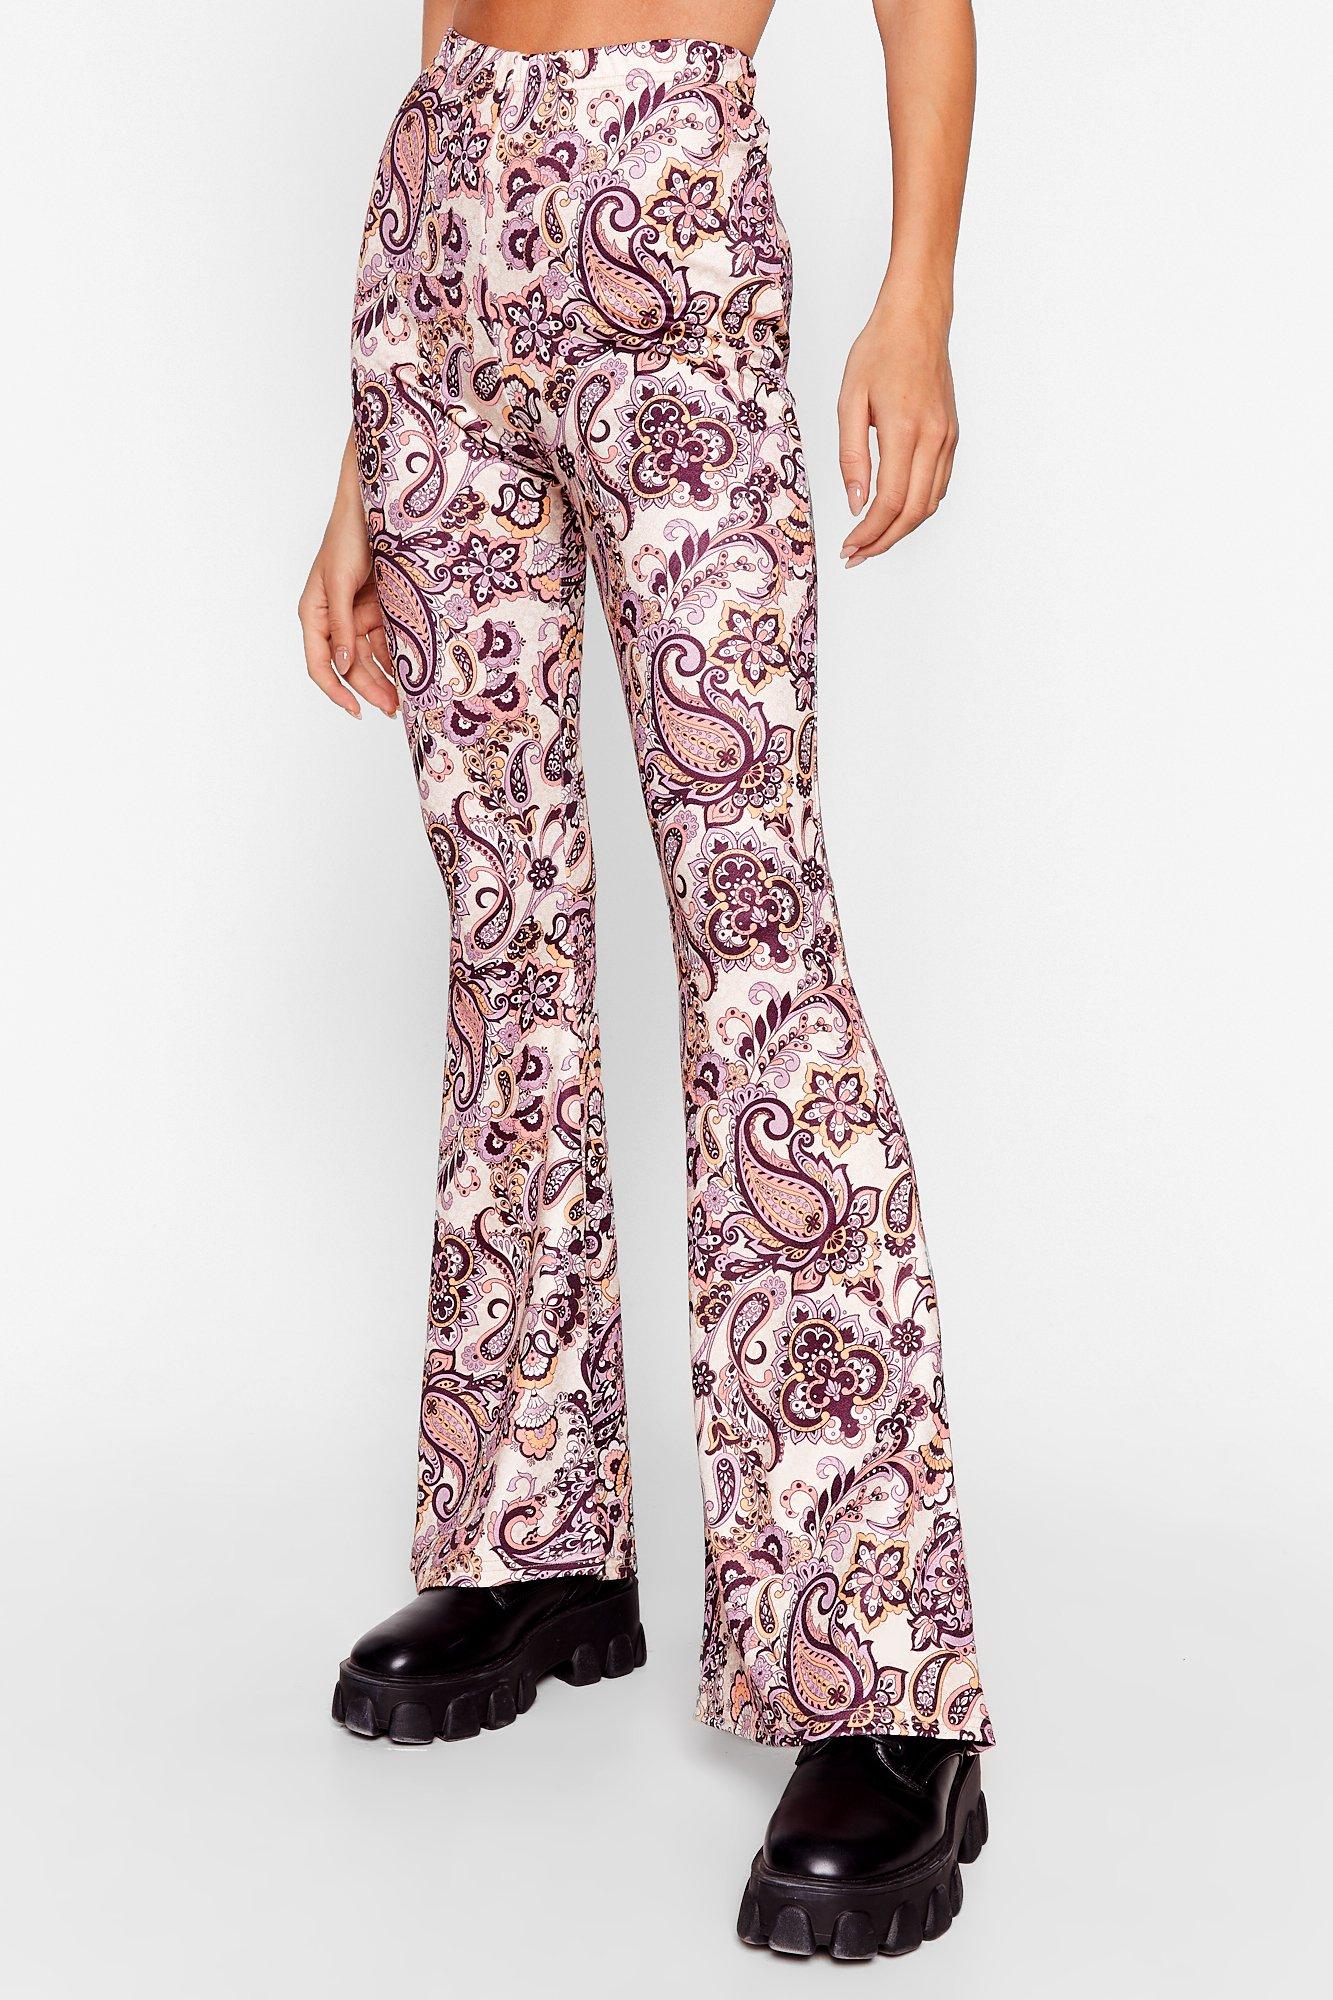 groovy trousers